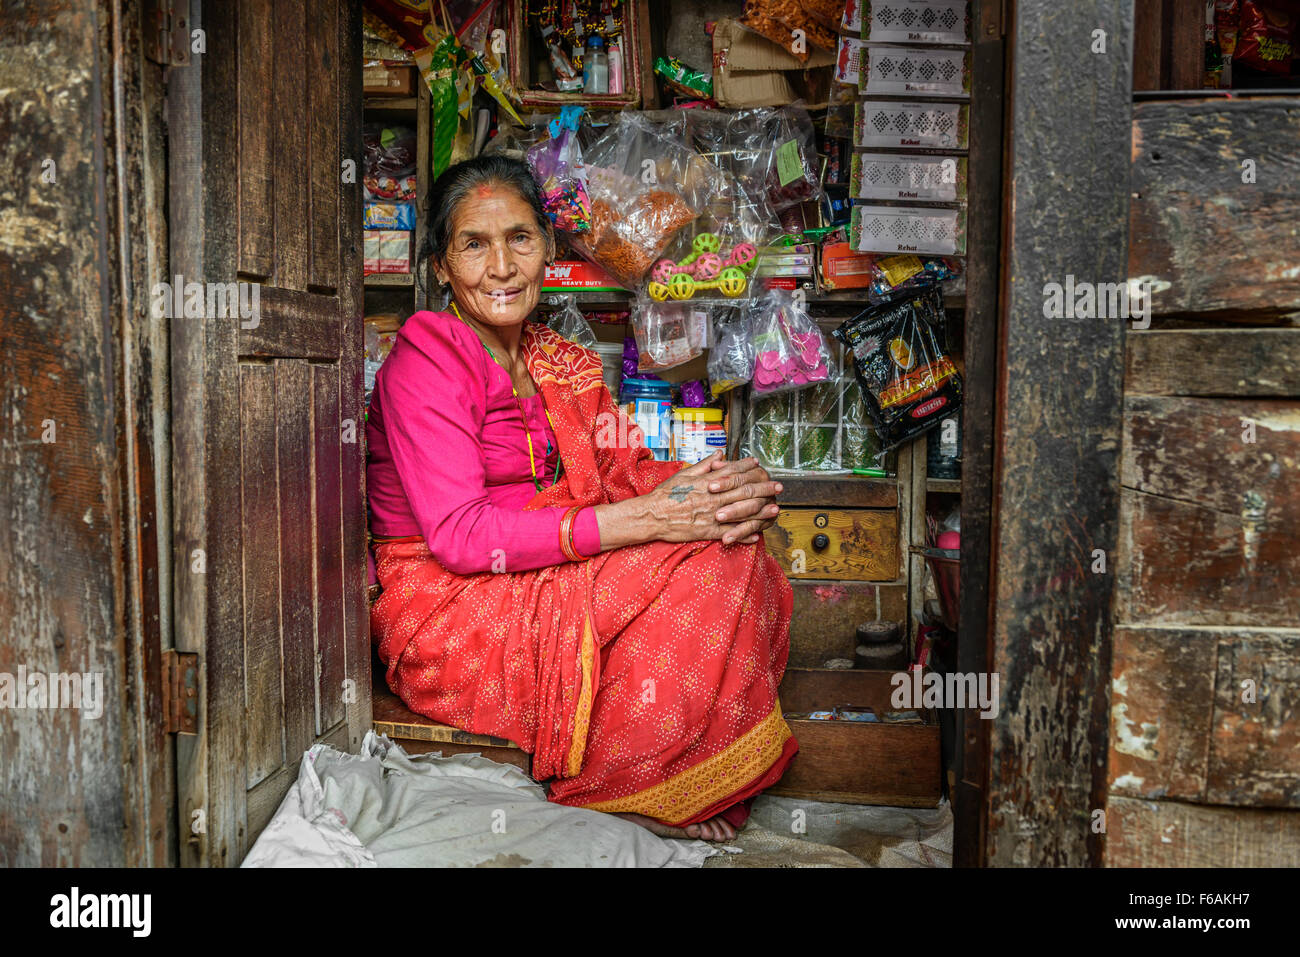 Old nepalese lady sells goods in her store. Stock Photo